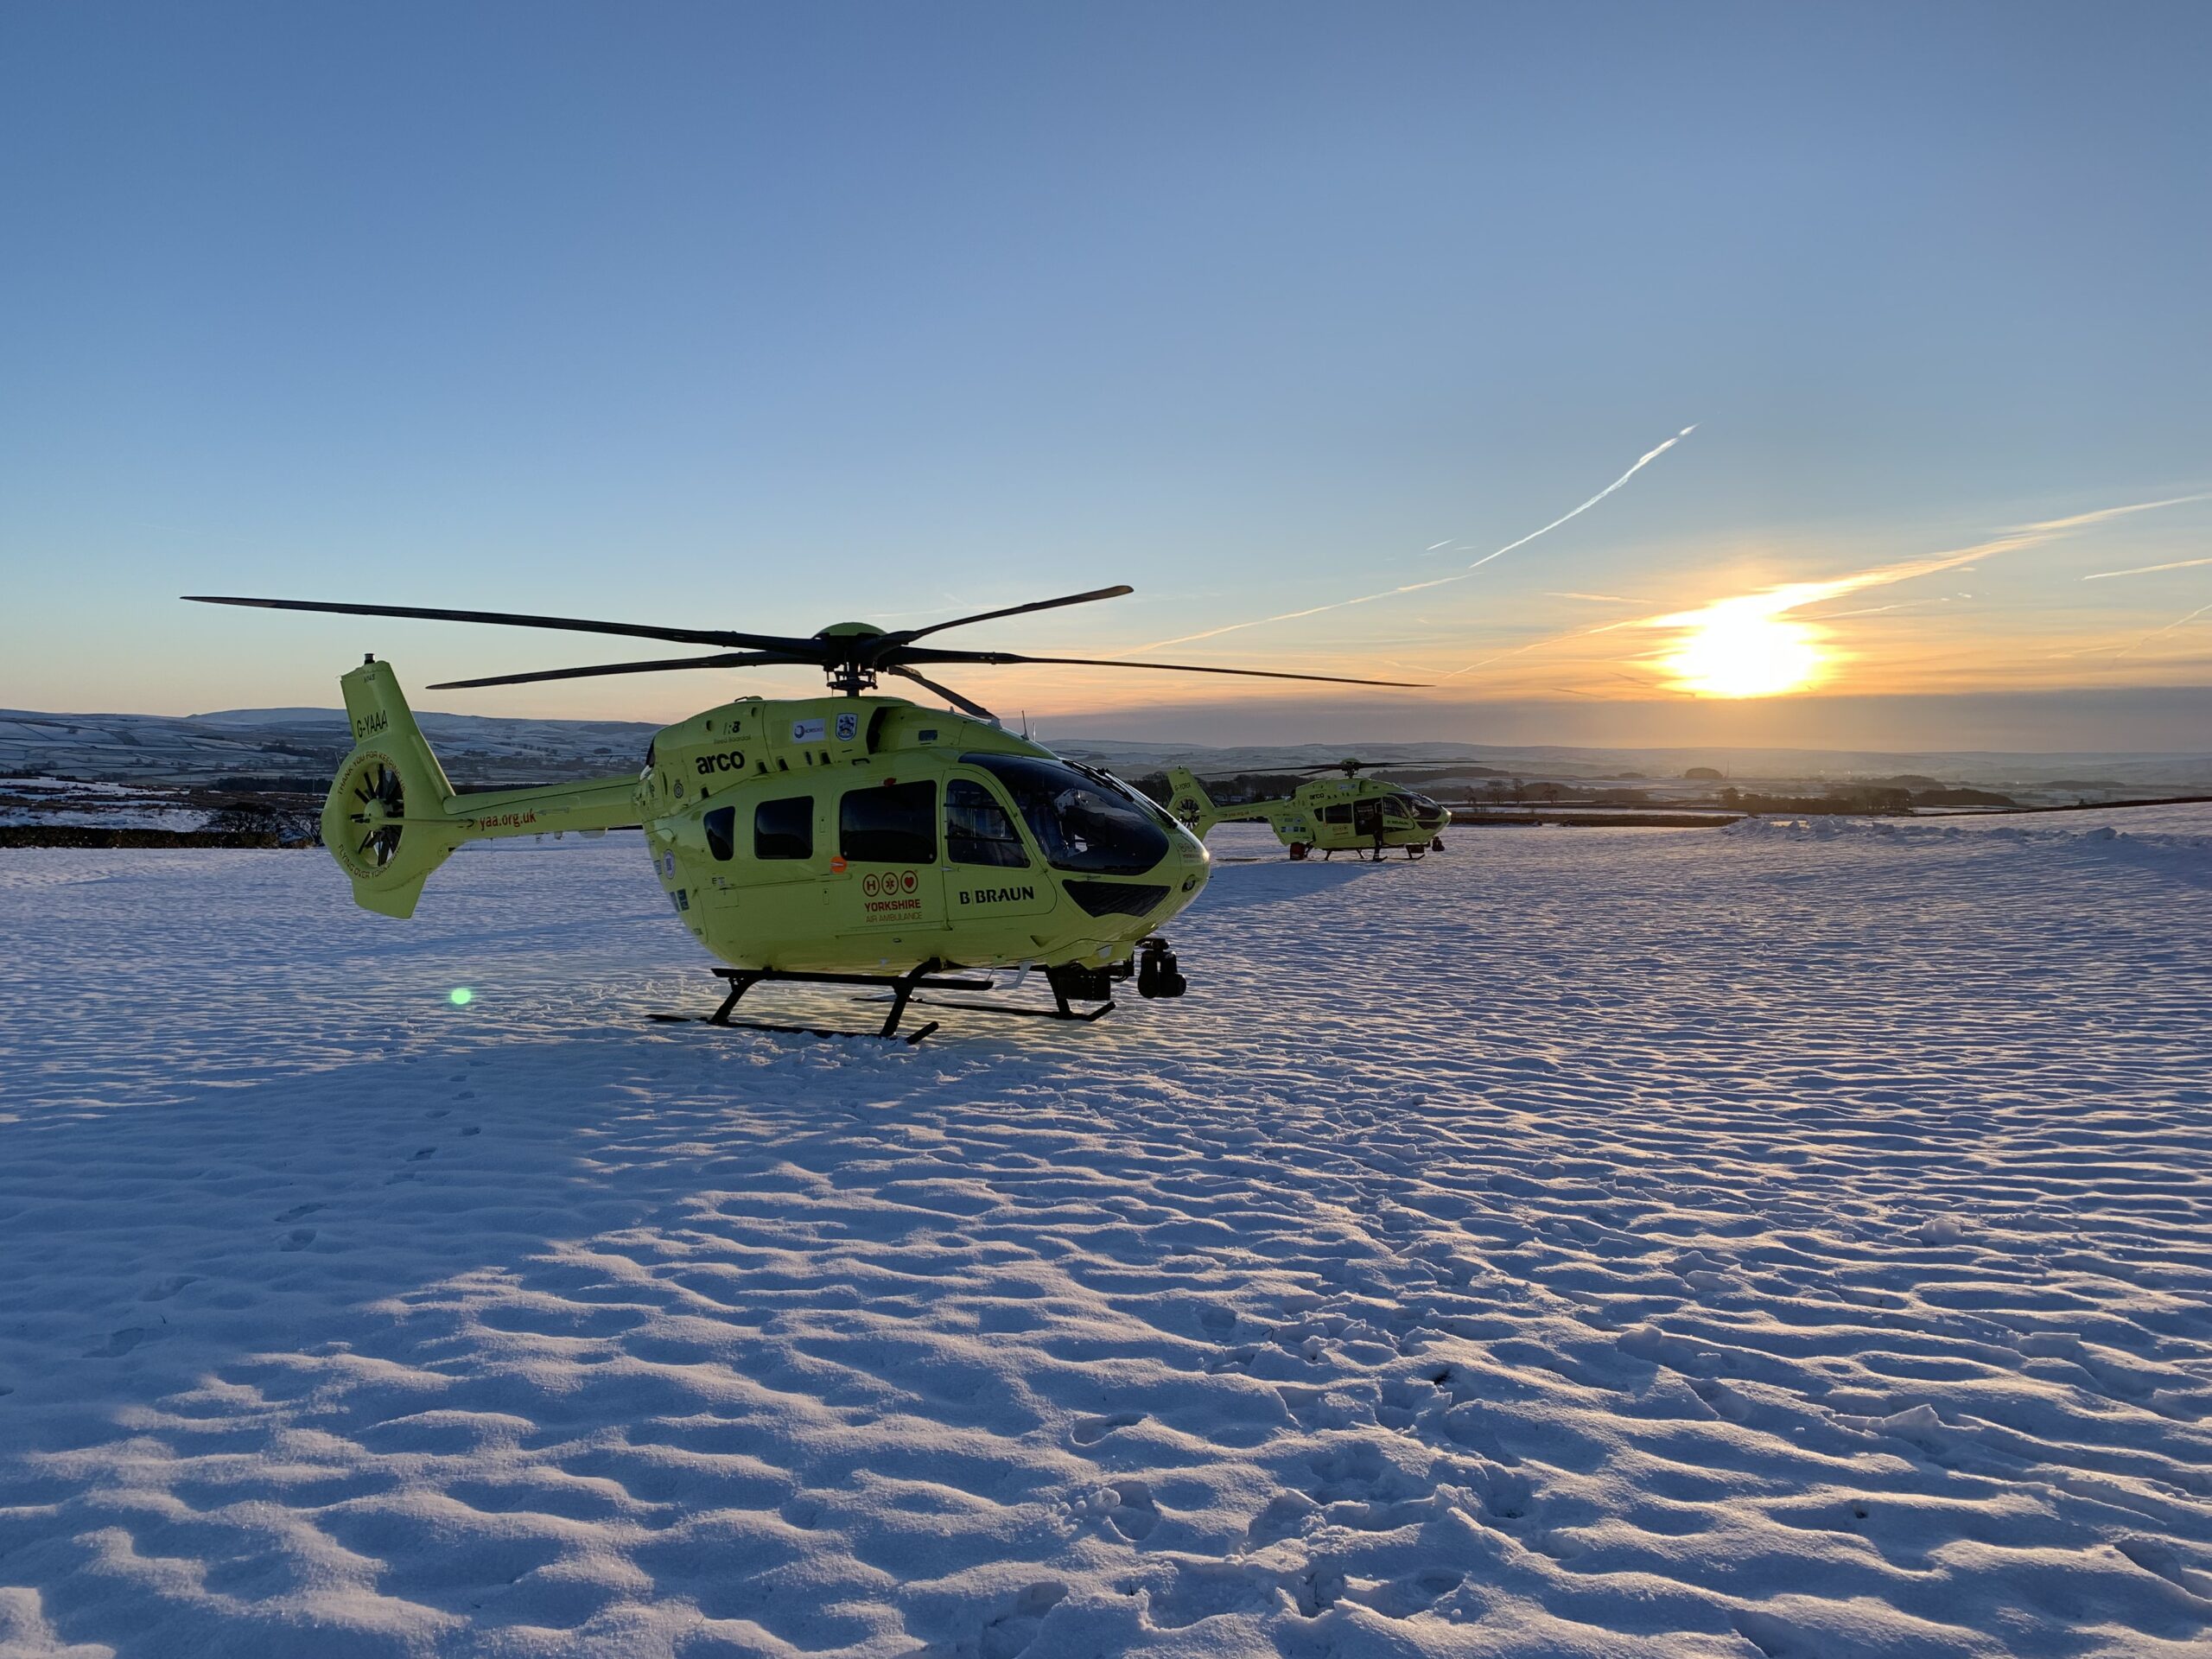 Two yellow helicopters in the snow at sunset